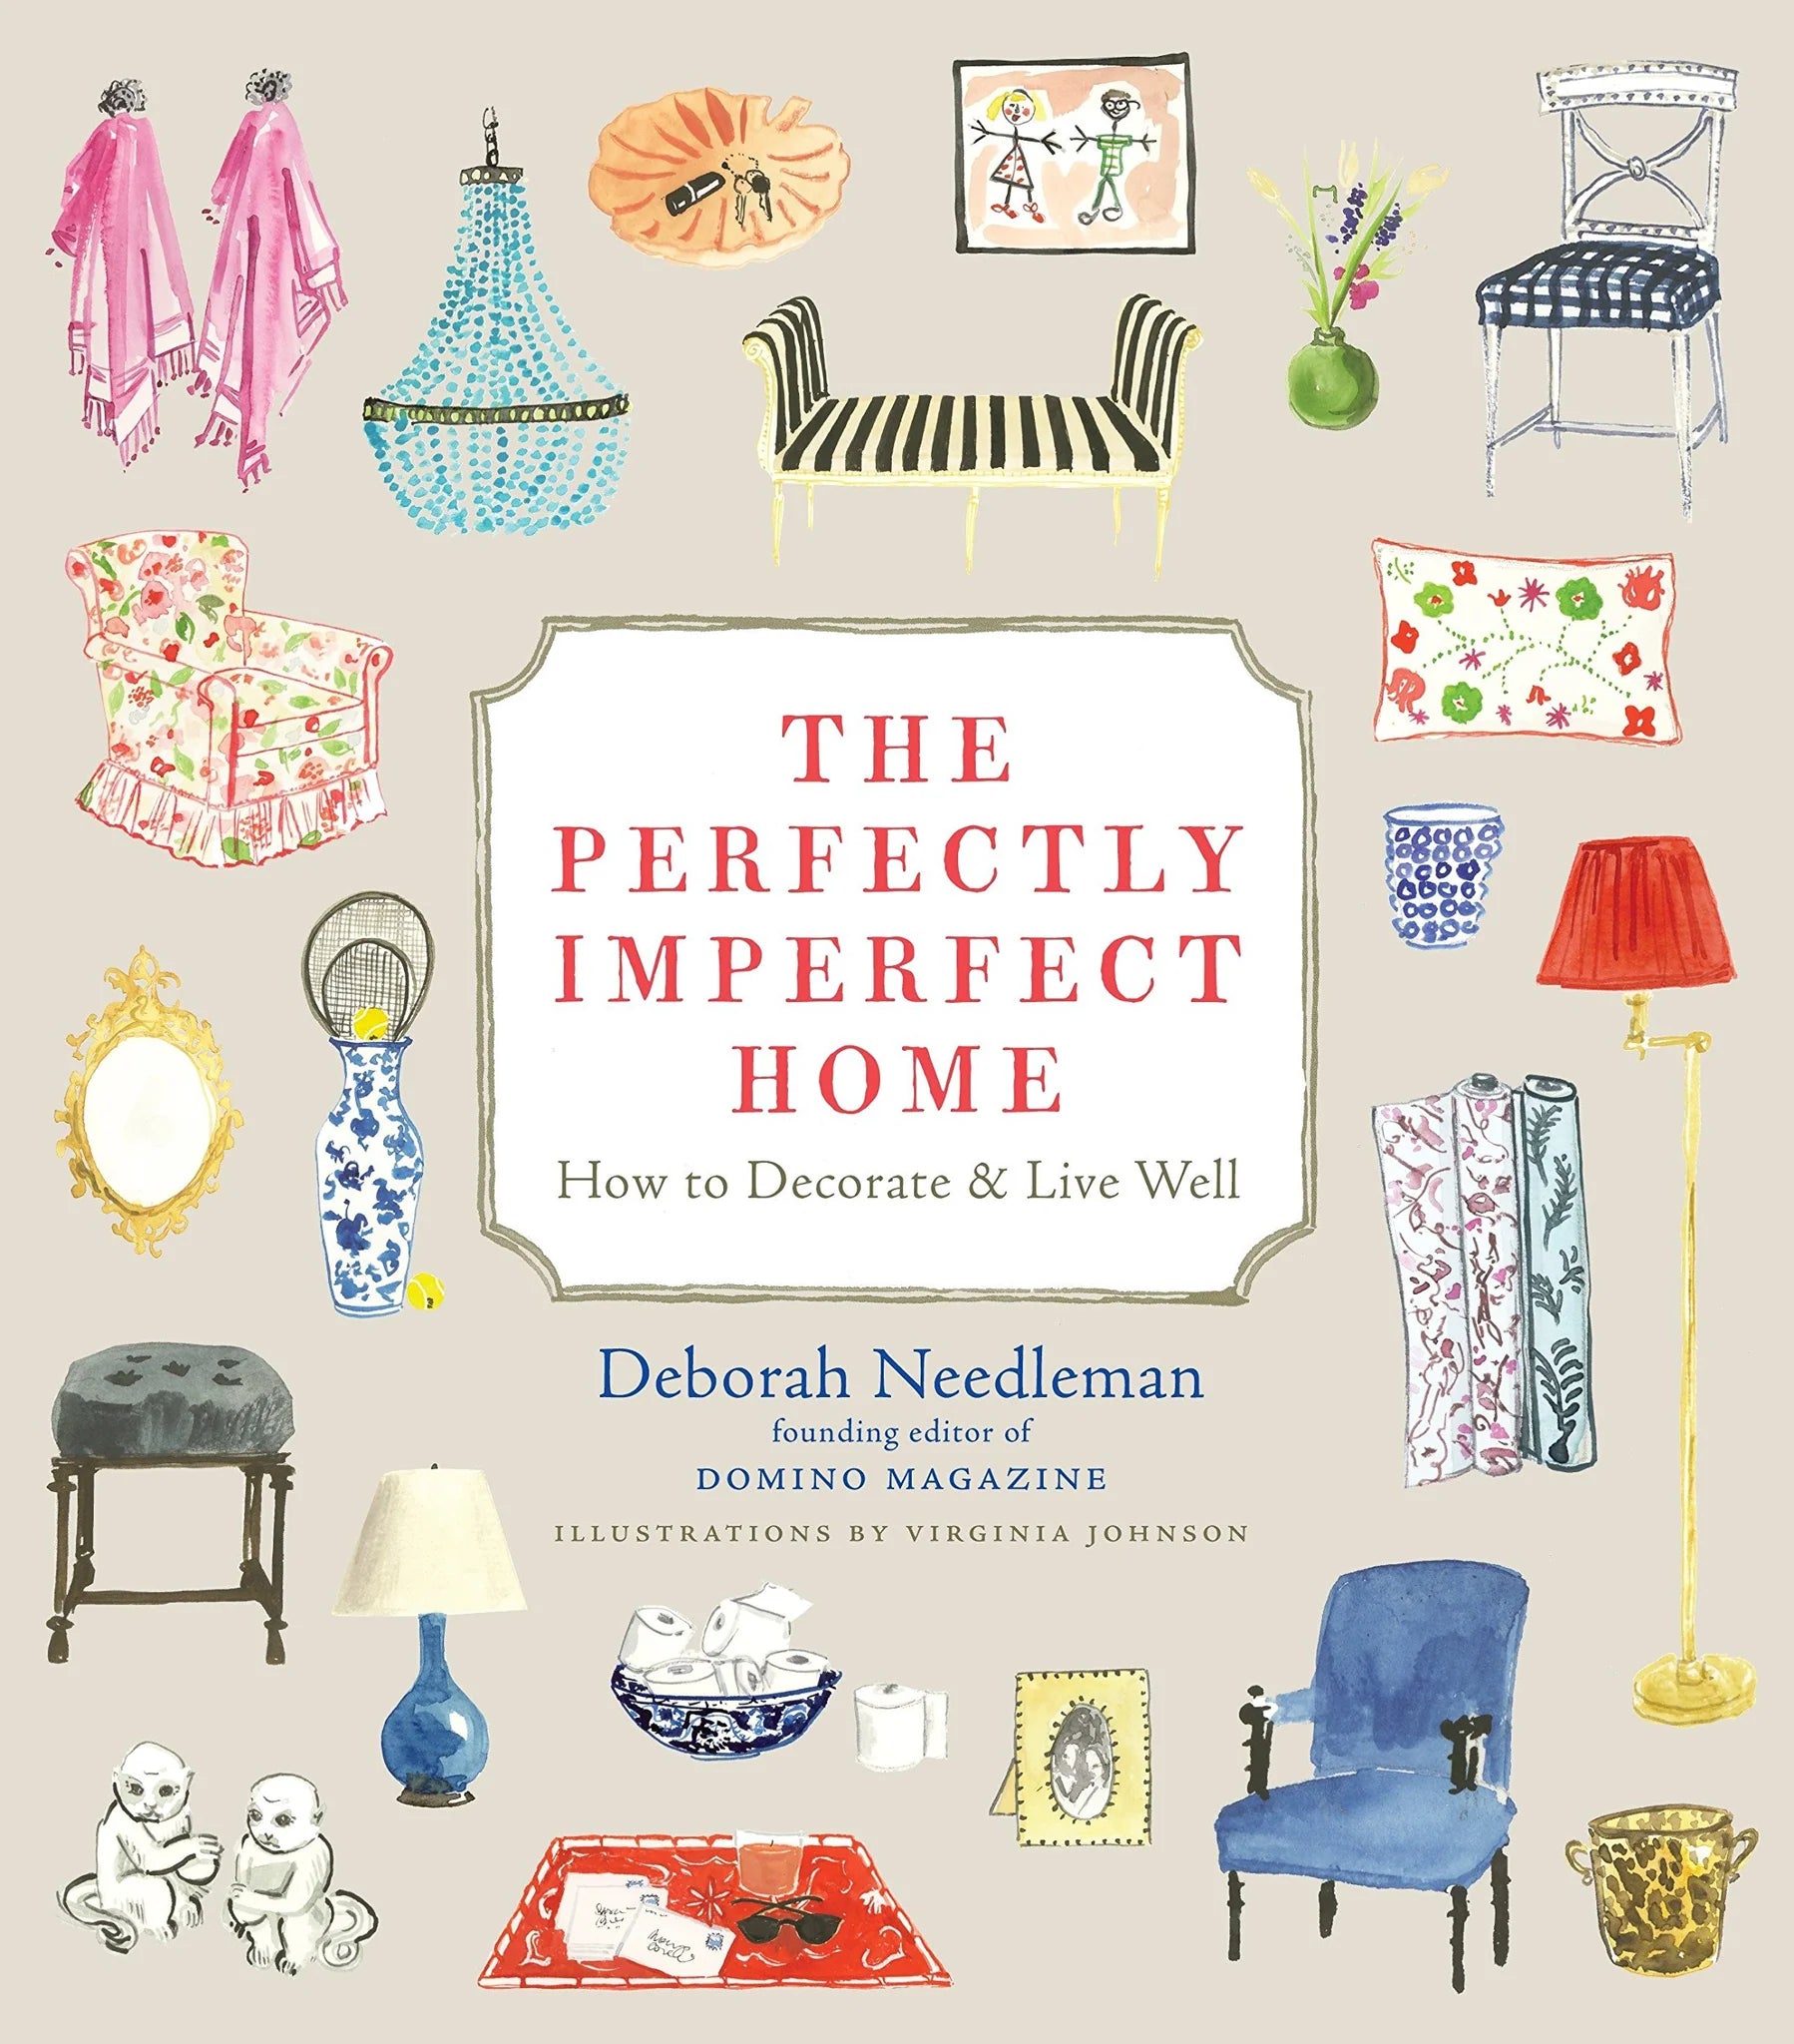 Book: The Perfectly Imperfect Home